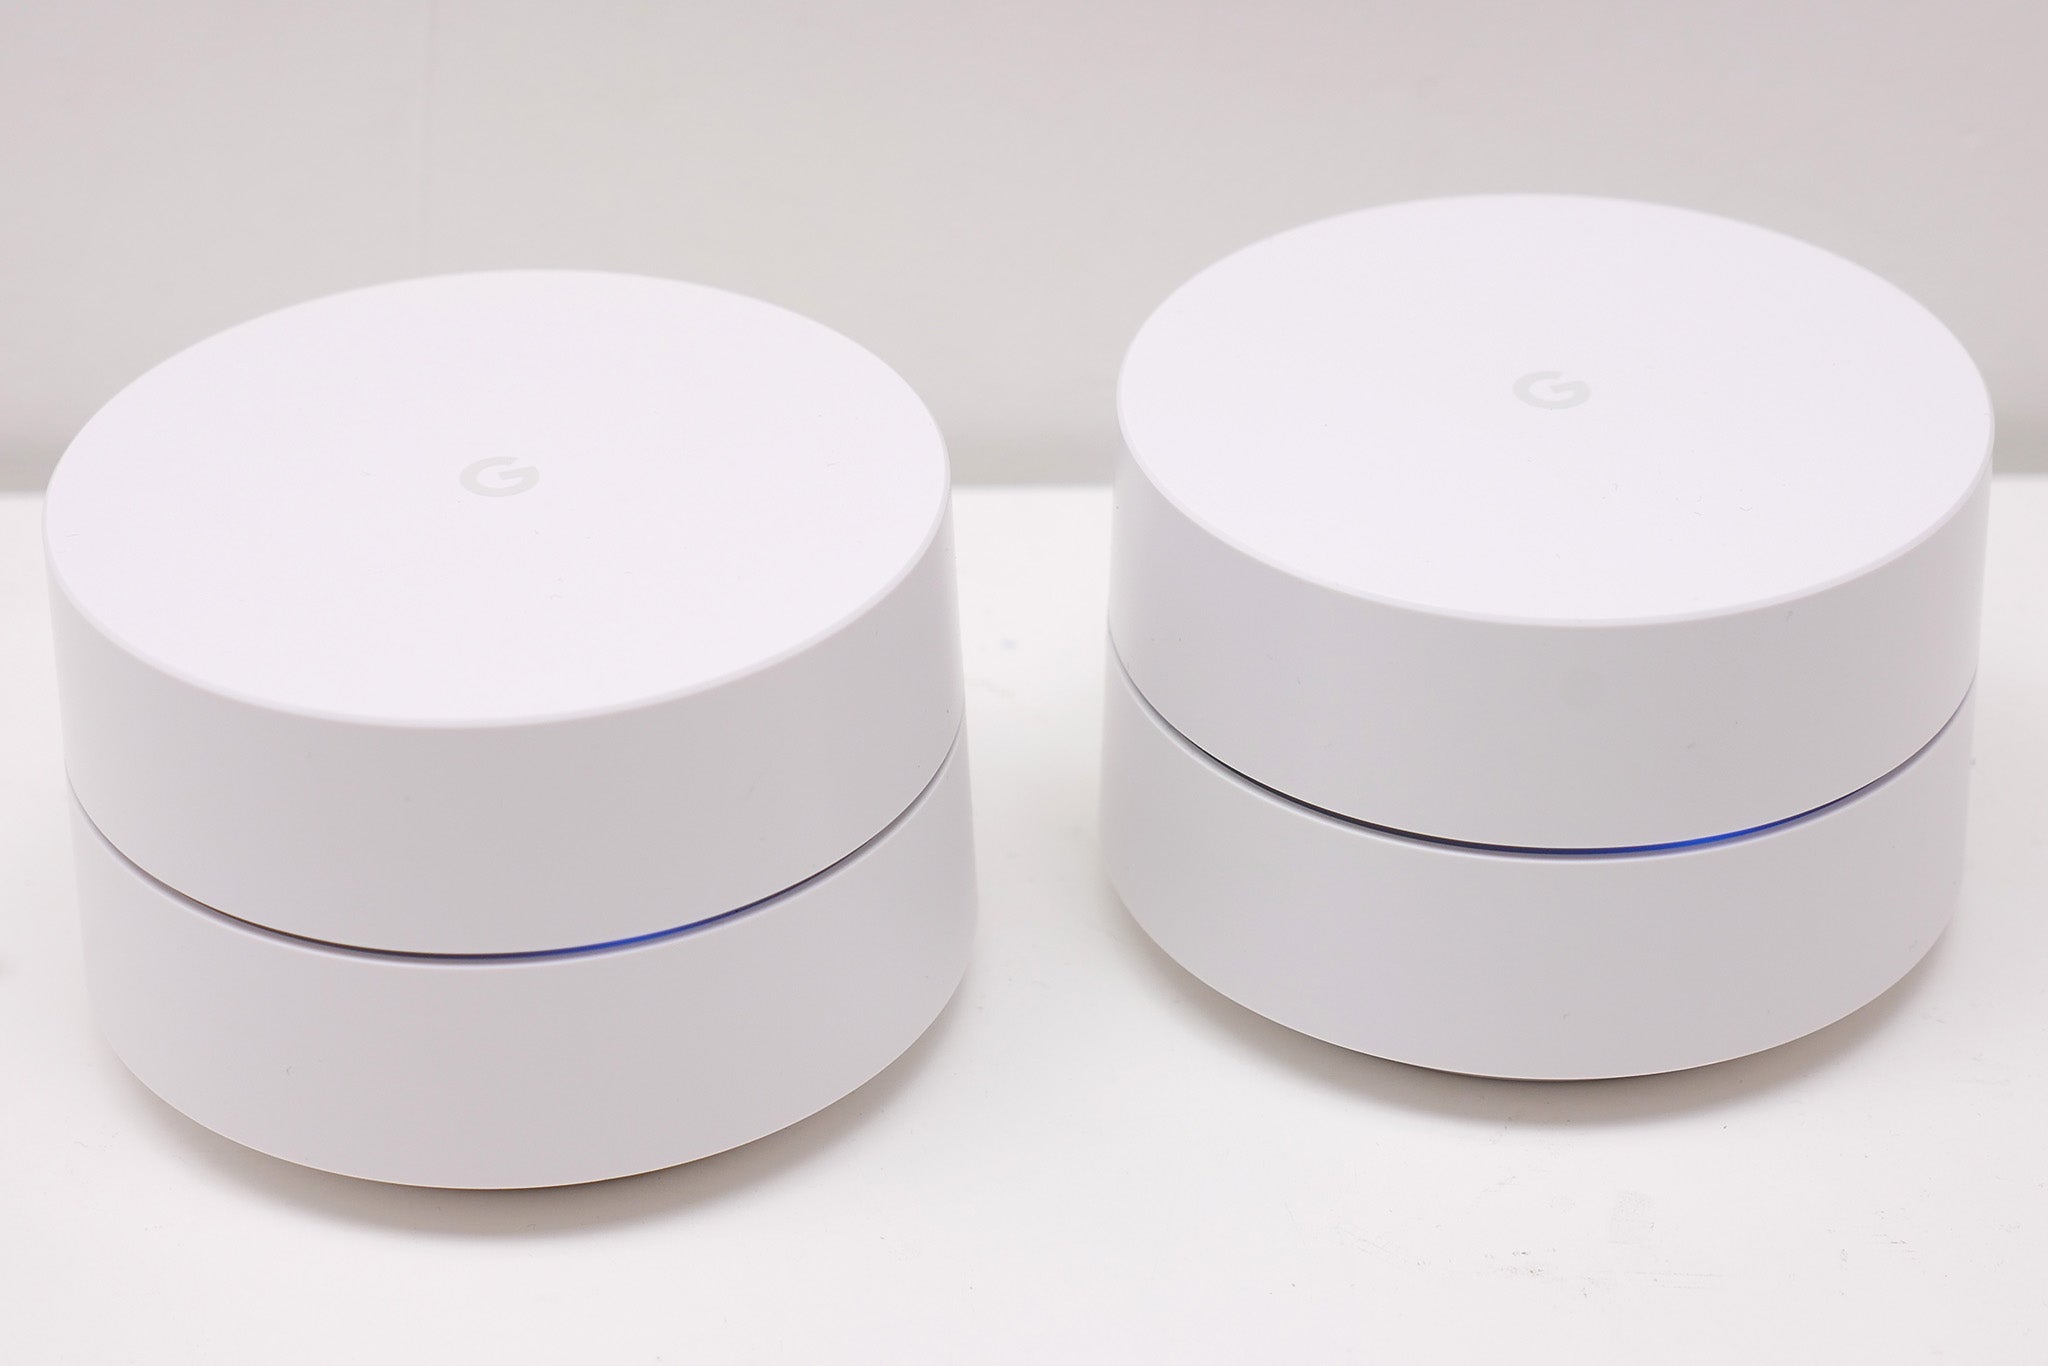 Two Google Wifi router units on a white background.